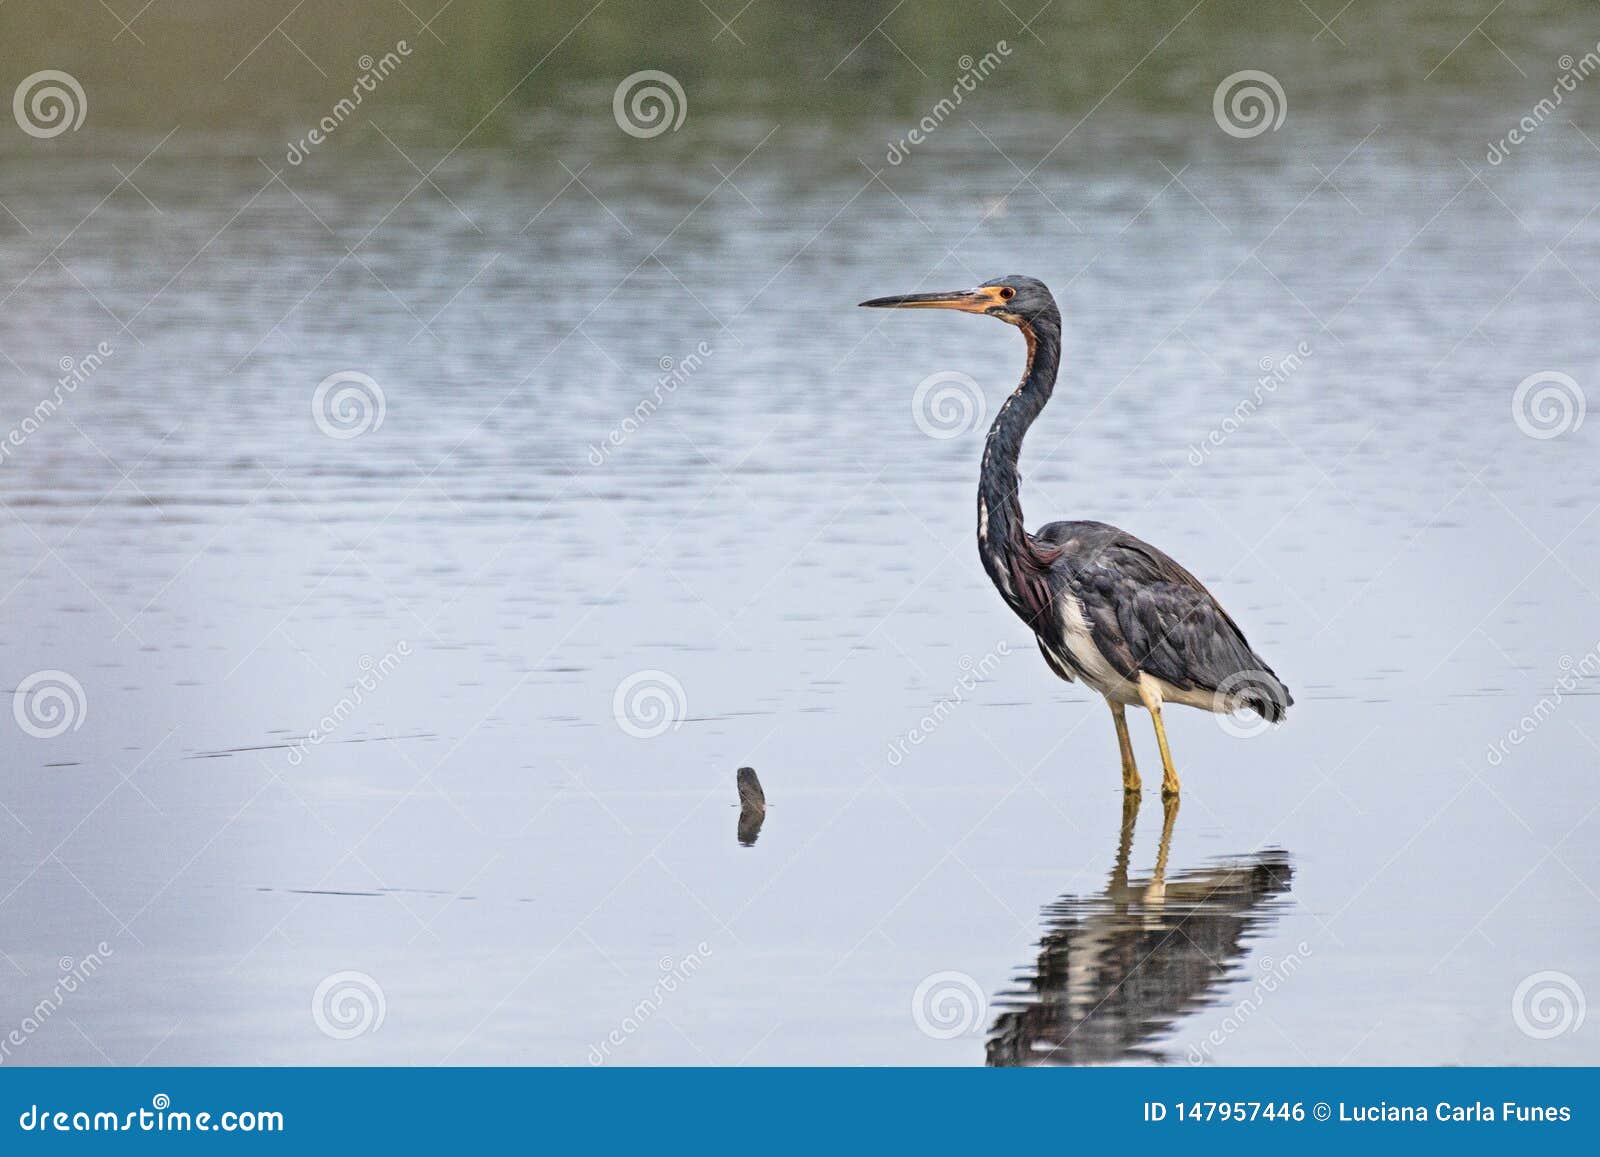 tricolored egretta heron stading in the water